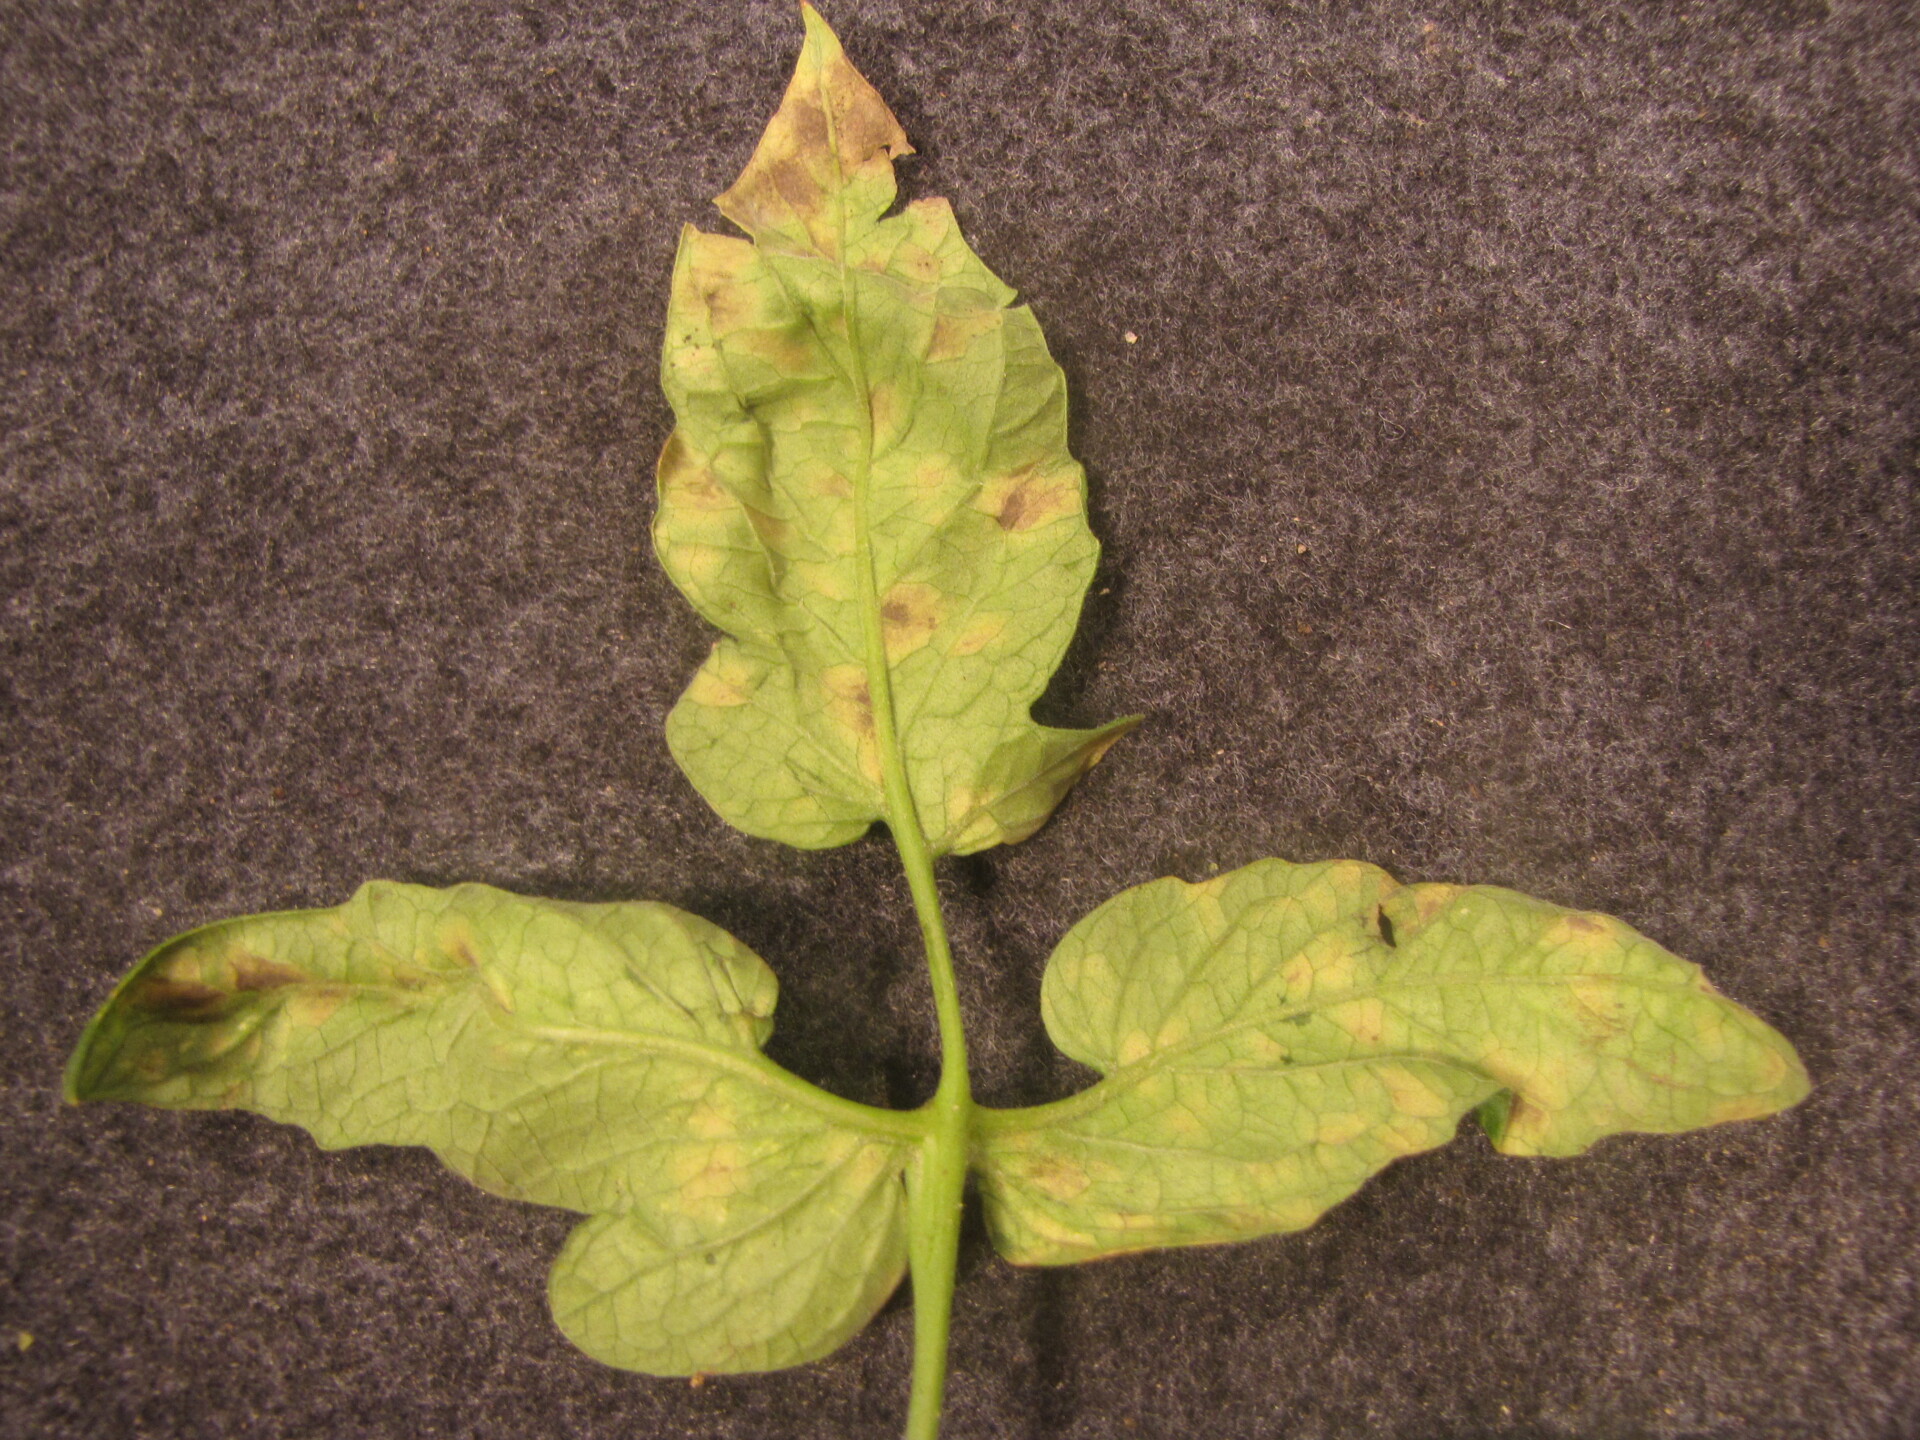 Figure 4. Another look at the underside of a tomato leaf with sporulation of Cercospora leaf mold.